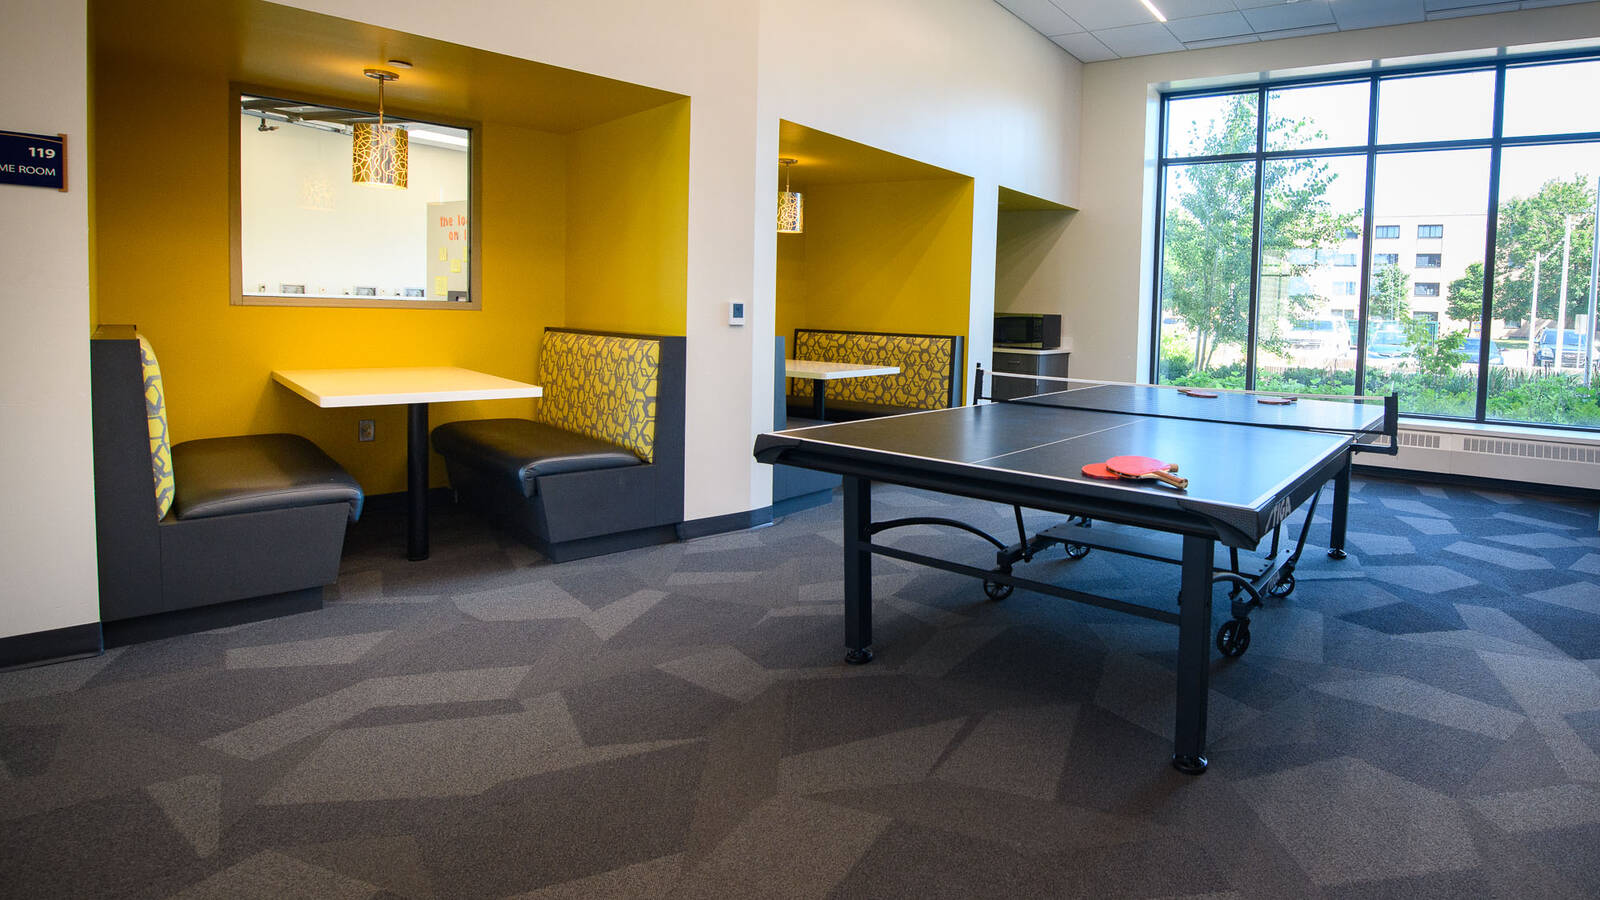 Common space in The Sites residence hall with booth-style seating and a large ping pong table